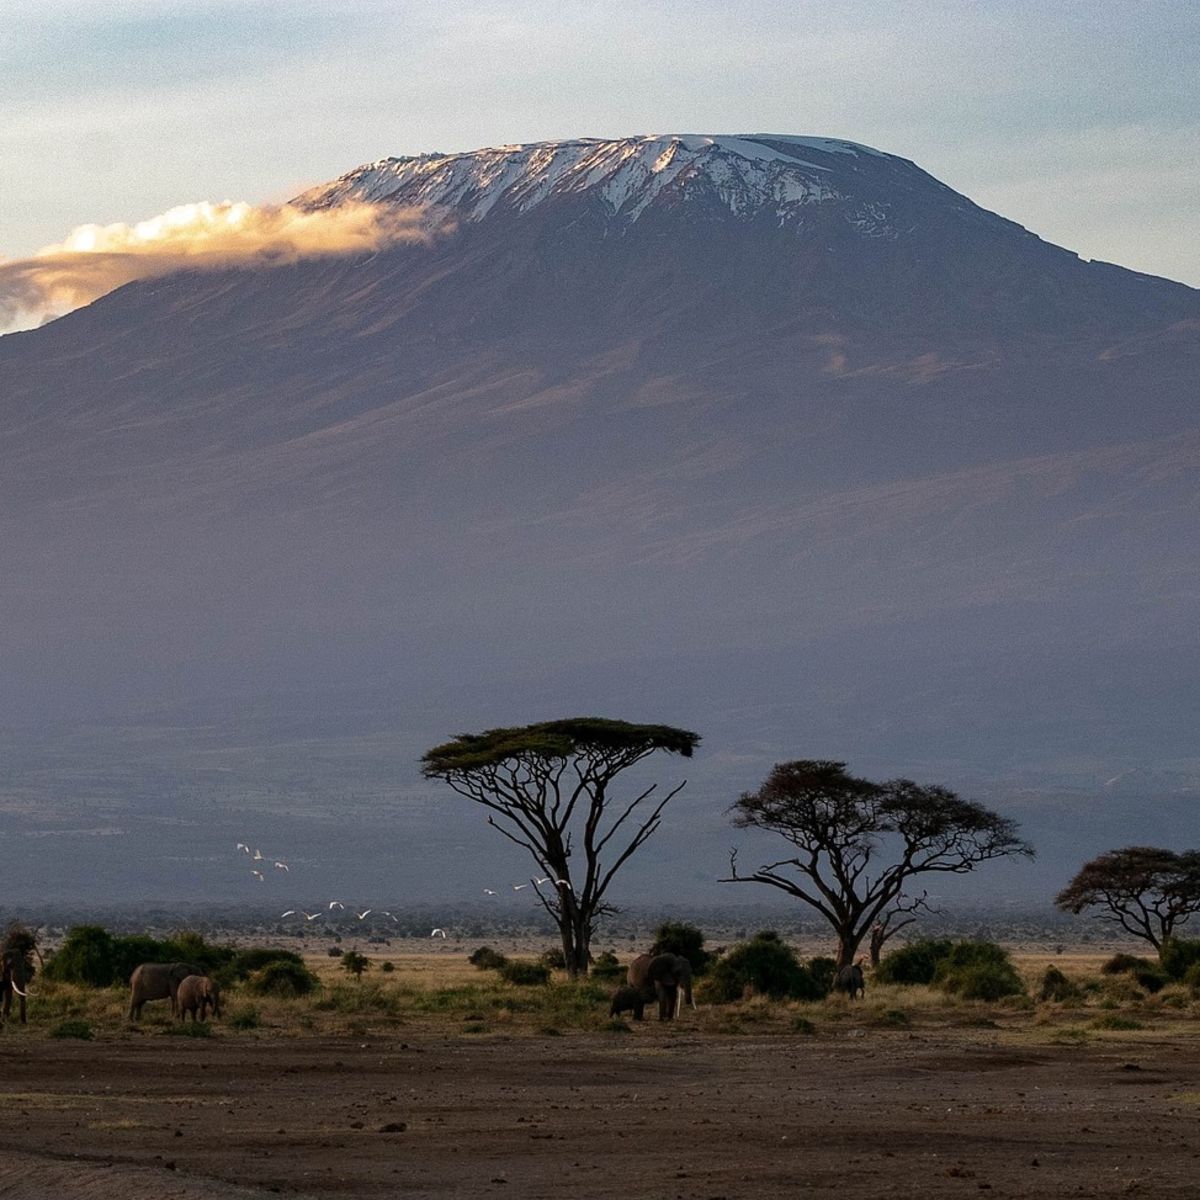 Mount Kilimanjaro seen from a distance with animals in foreground